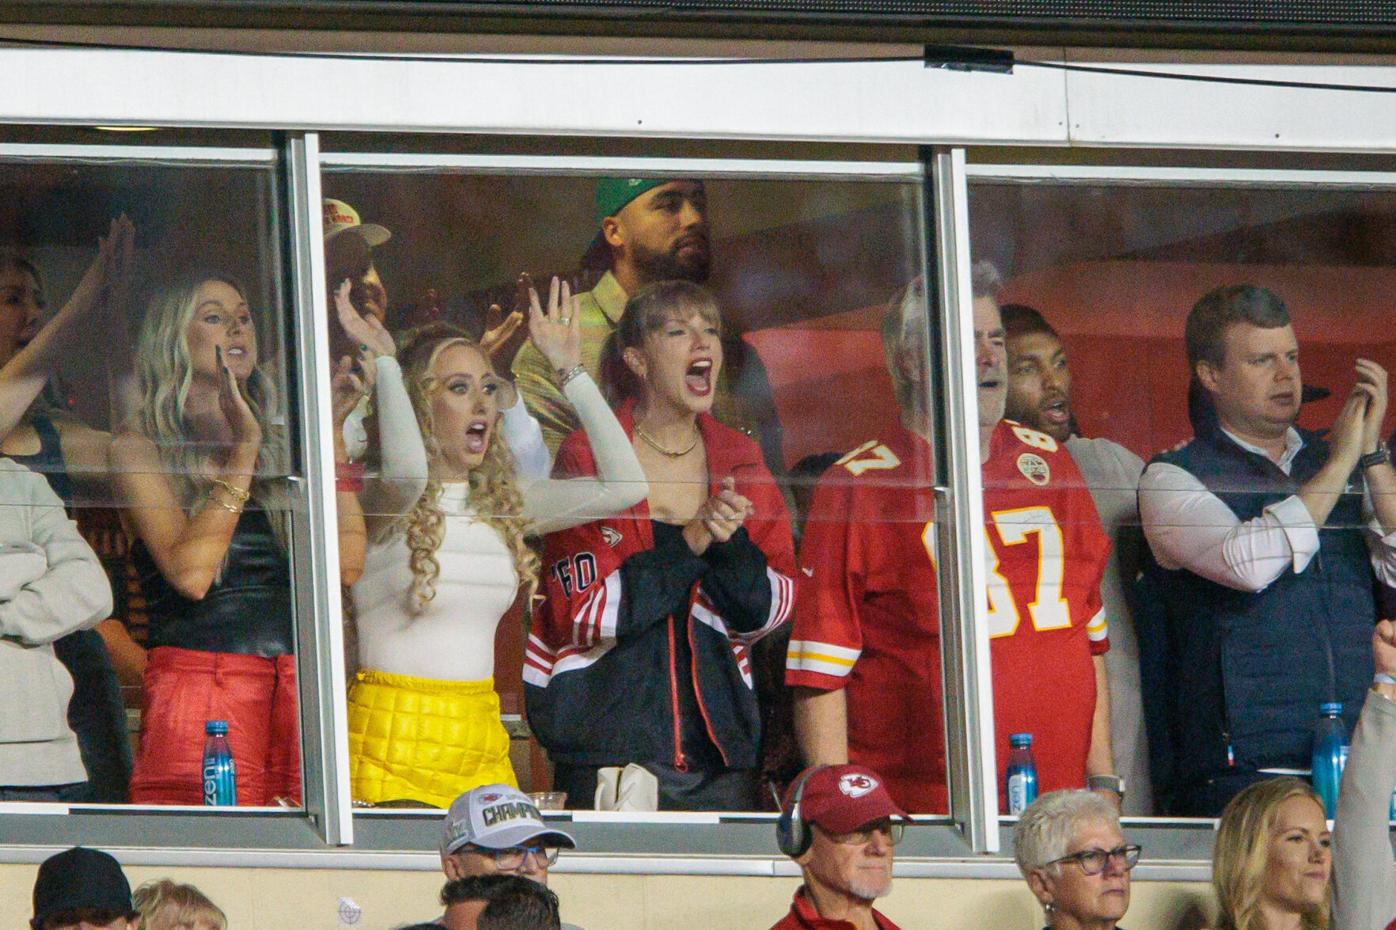 Taylor Swift Will Be With Travis Kelce Weekend After Broncos Game